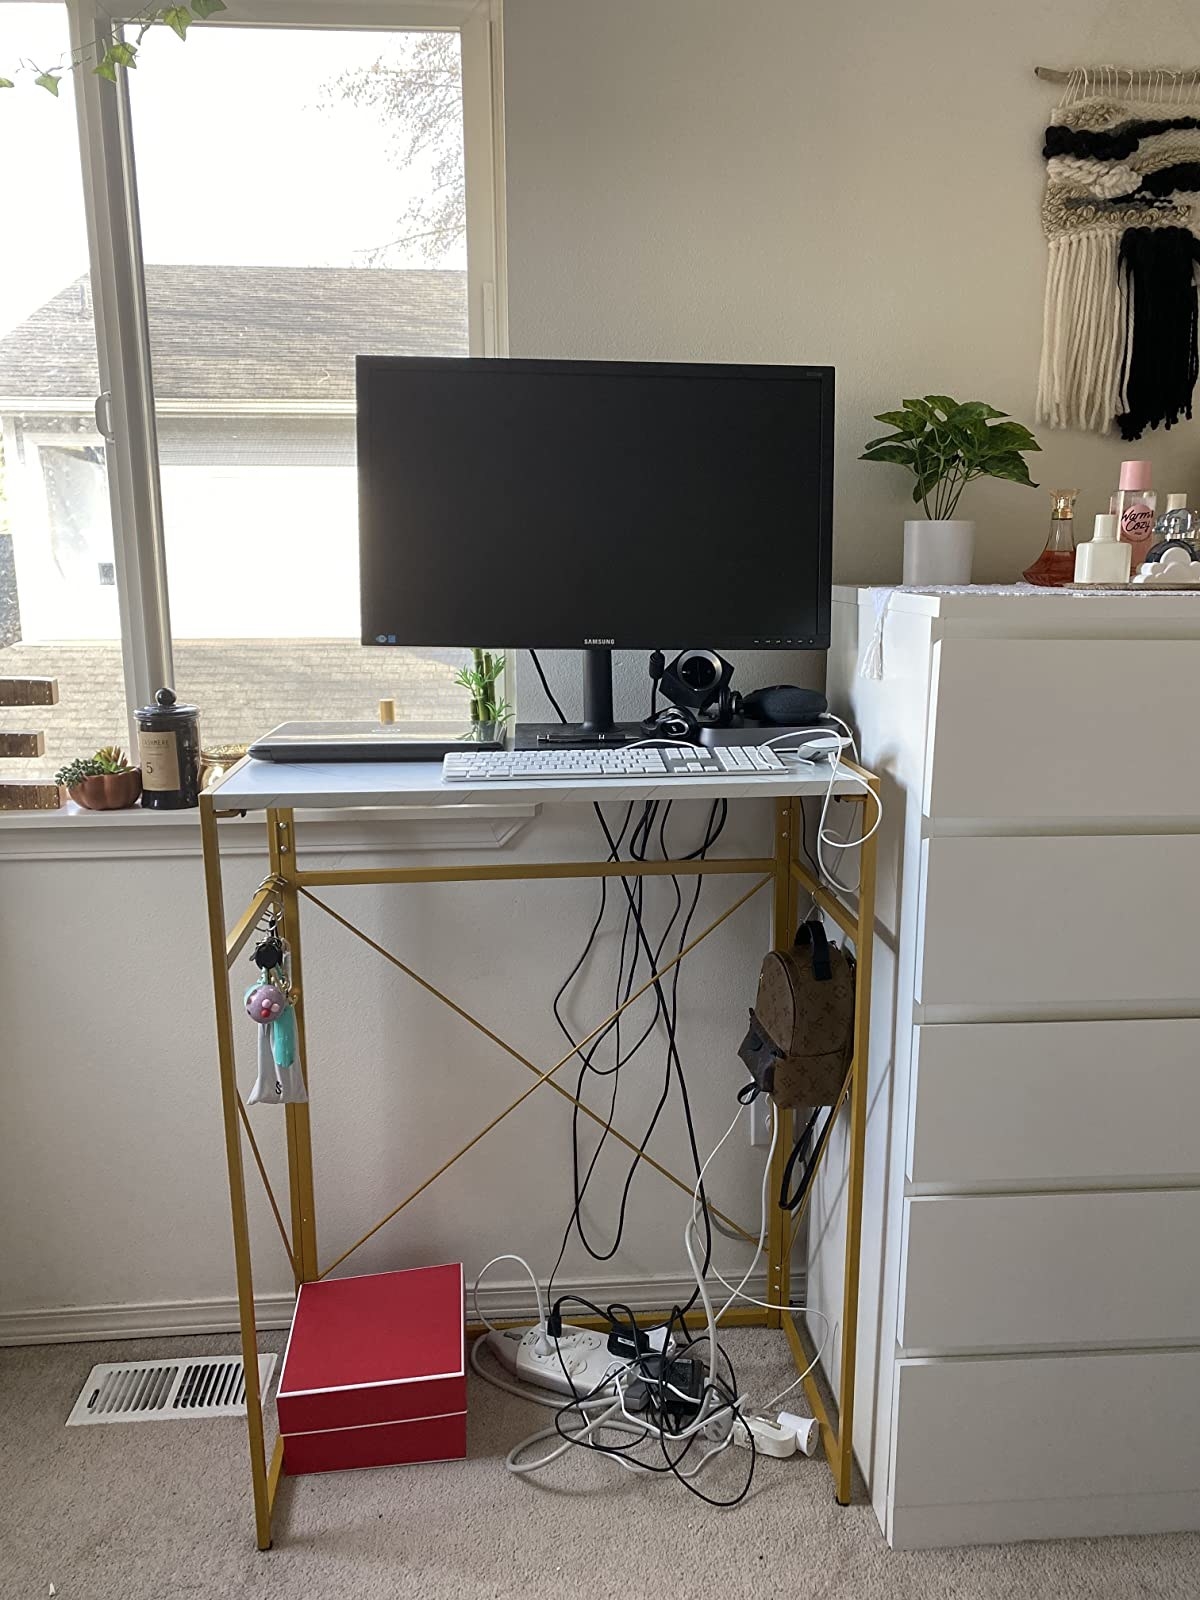 reviewer image of the Mr IRONSTONE Folding Standing Desk next to a dresser in a bedroom